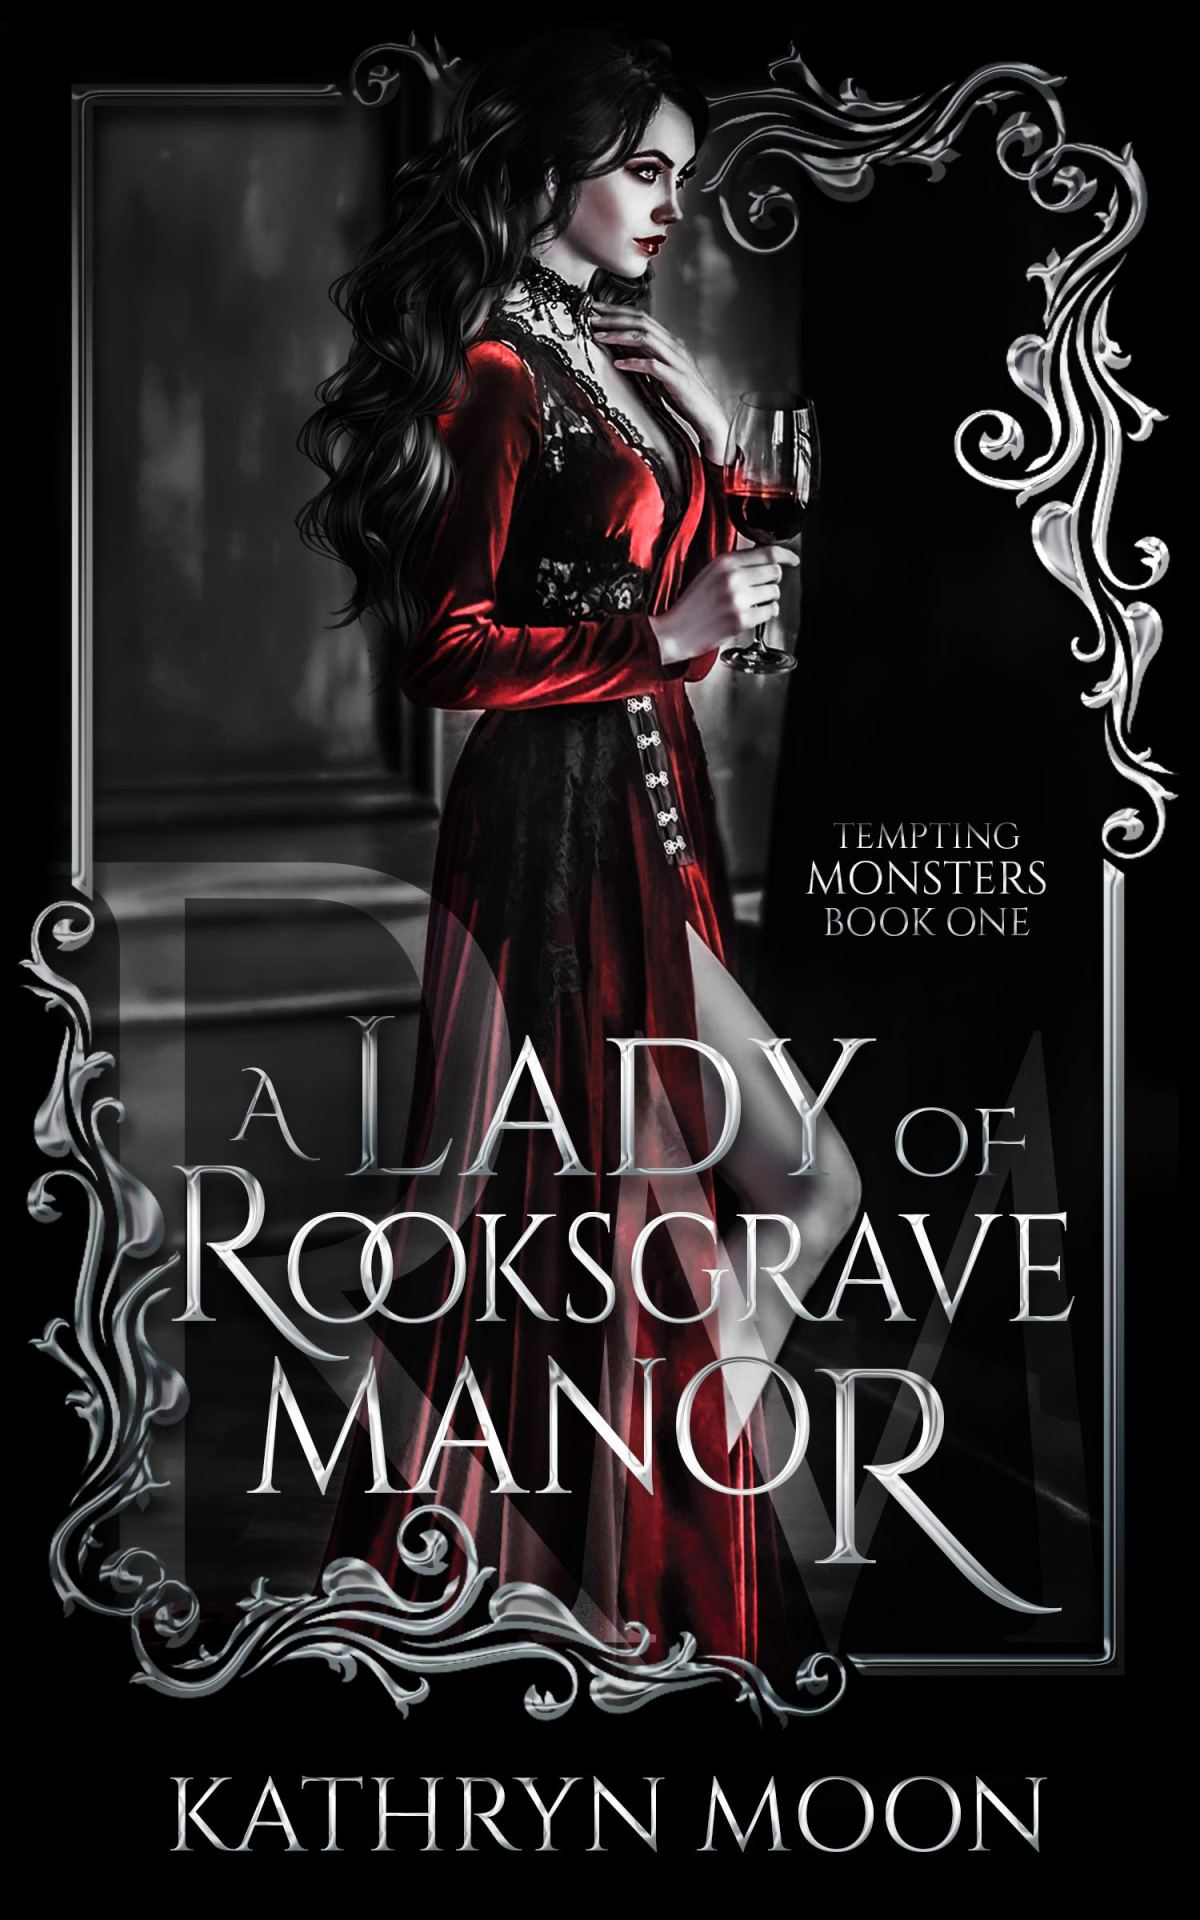 Book Review: A Lady of Rooksgrave Manor by Kathryn Moon